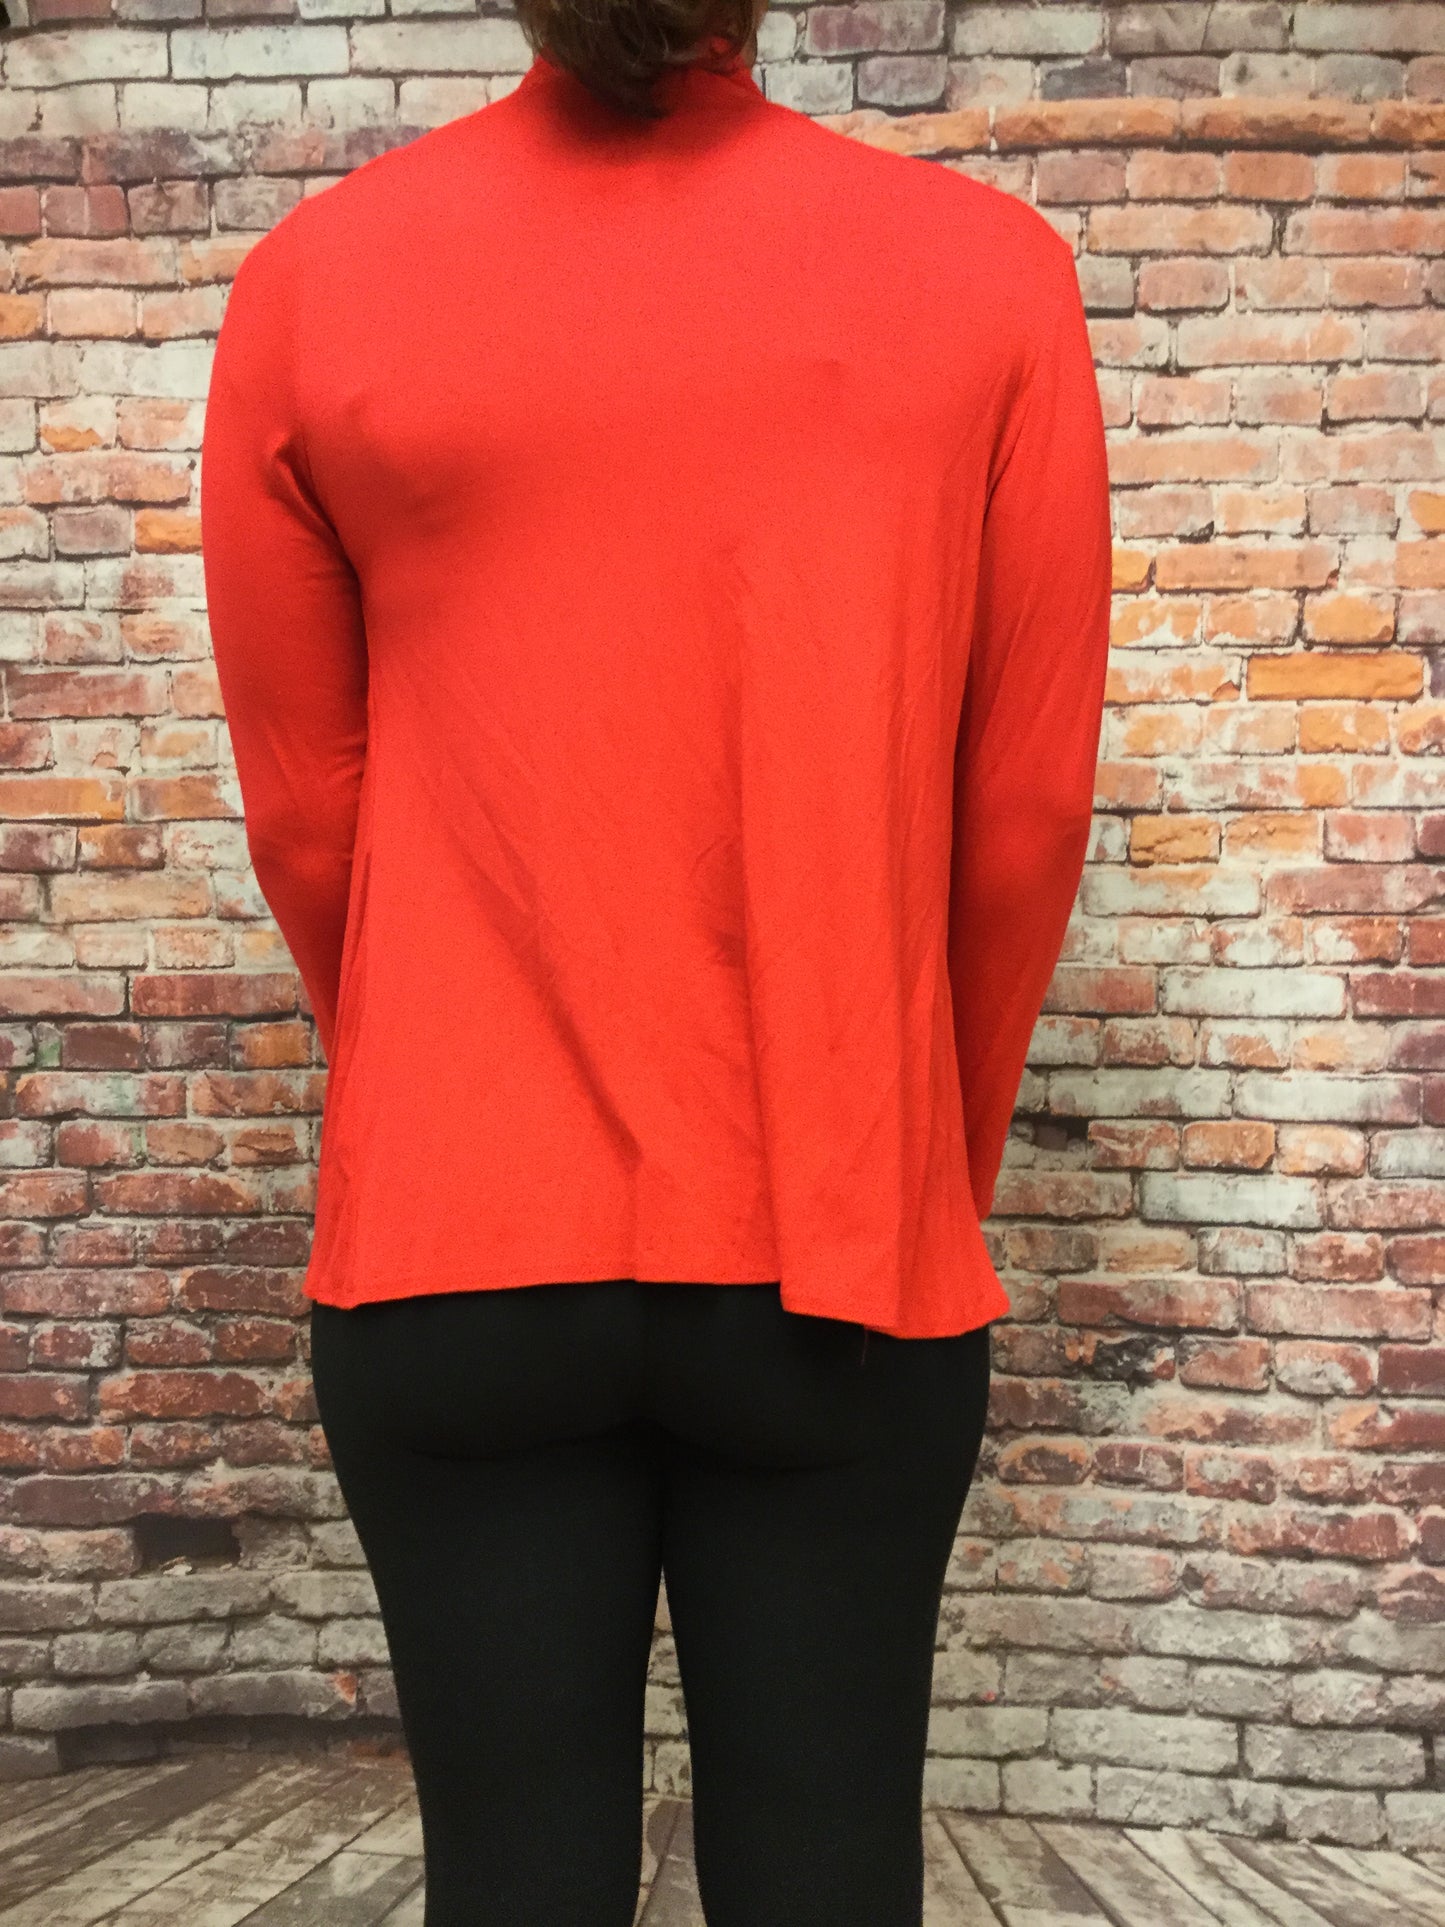 Waist Length Angled Front Red Cardigan